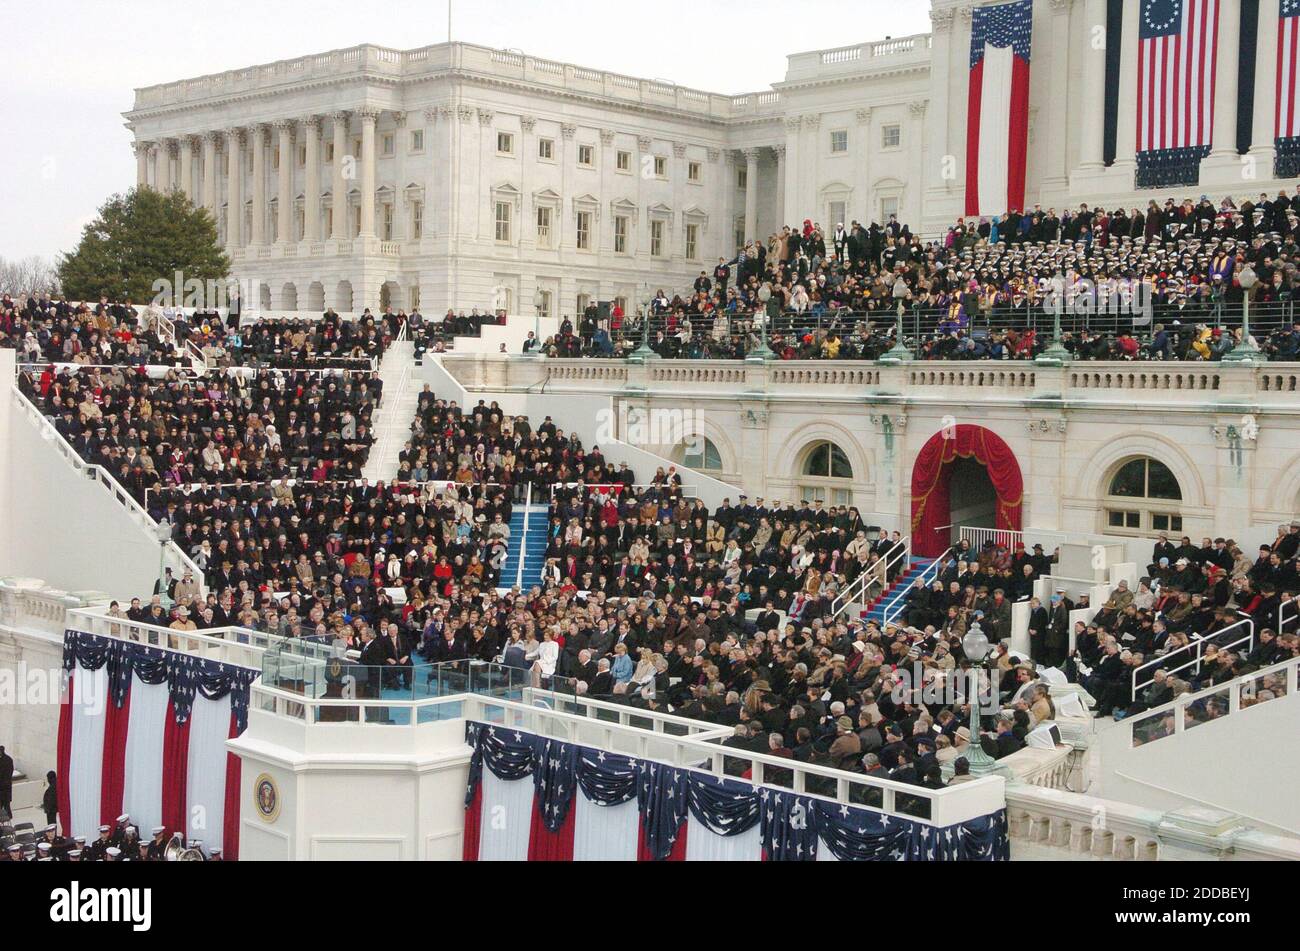 NO FILM, NO VIDEO, NO TV, NO DOCUMENTARY - Diginitaries sit on the steps of the Capitol for the swearing in of George W. Bush for his second term as U.S. President. Washington, DC, USA, on January 20, 2005. Photo by George Bridges/US News Story Slugged/KRT/ABACA. Stock Photo